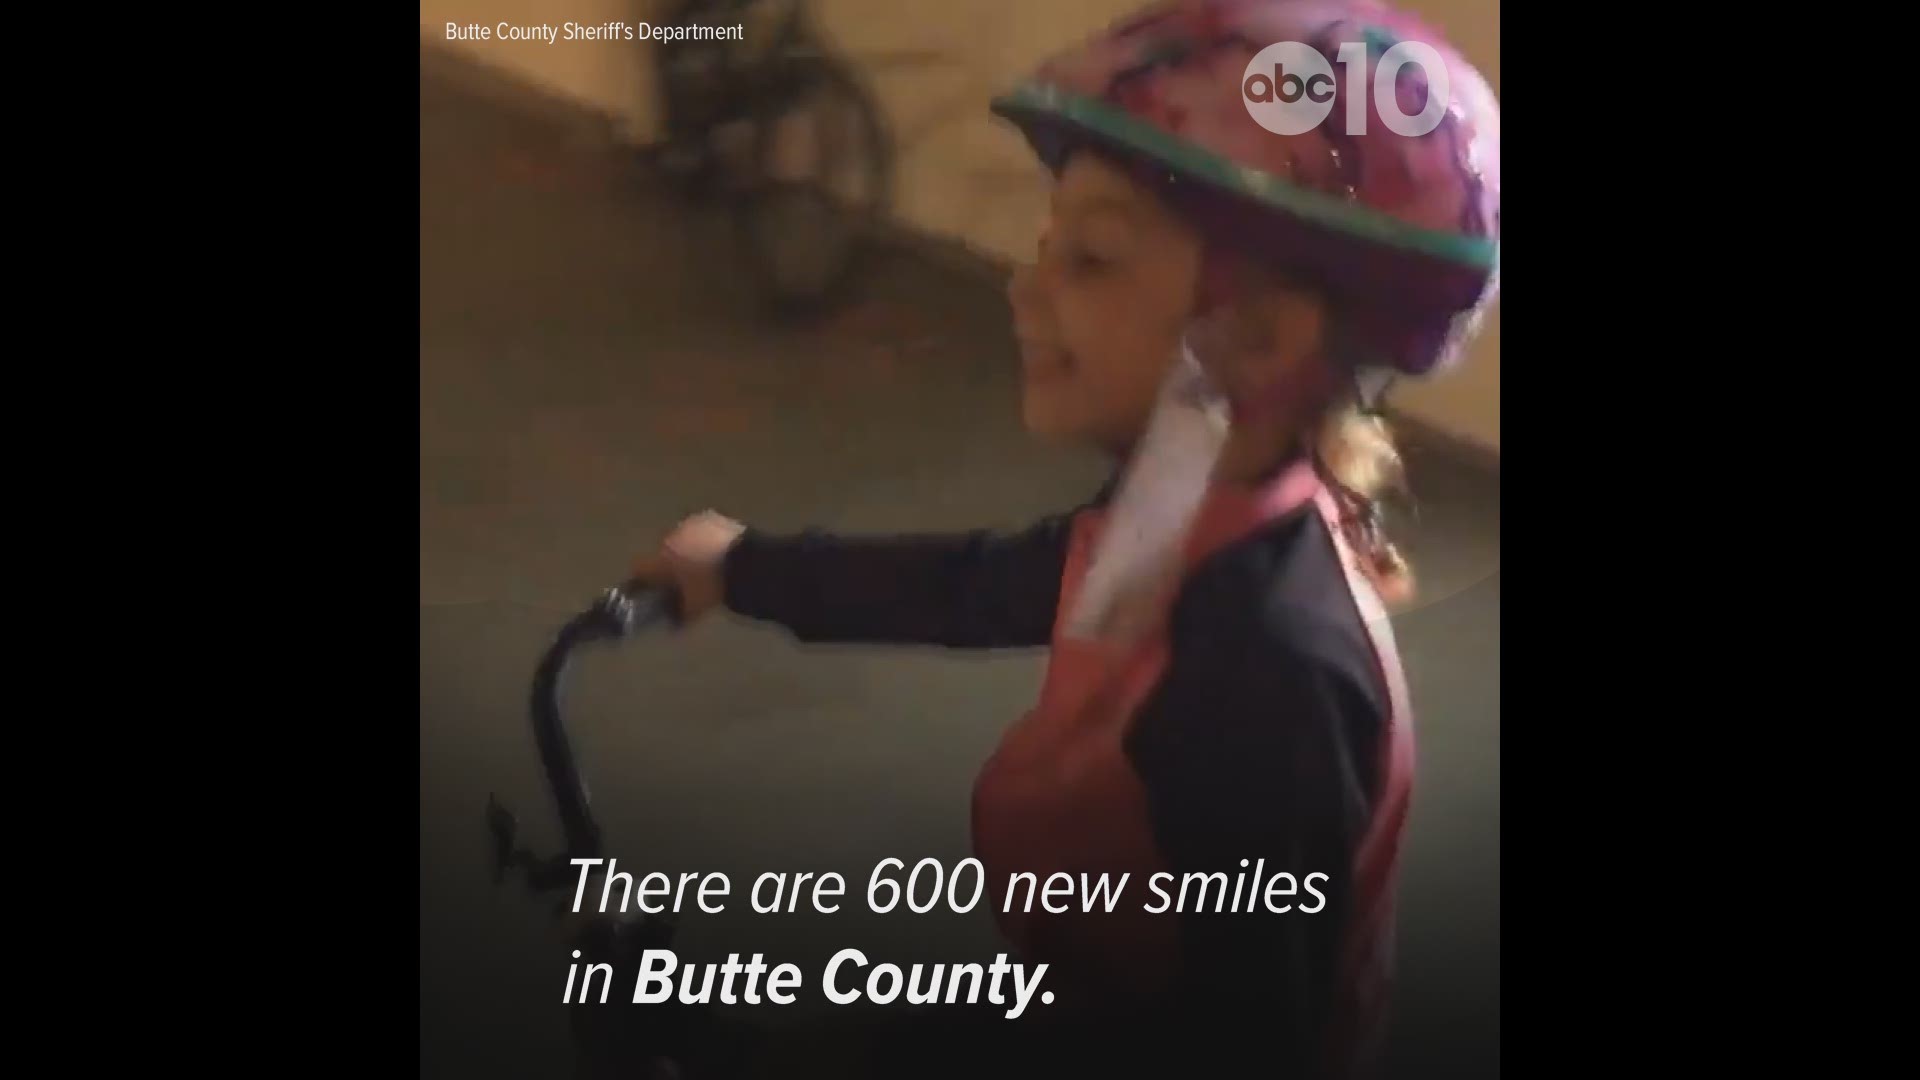 The Butte County Sheriff's Department was able to gift the bikes to children affected by the fire thanks to more than 25 generous donors.